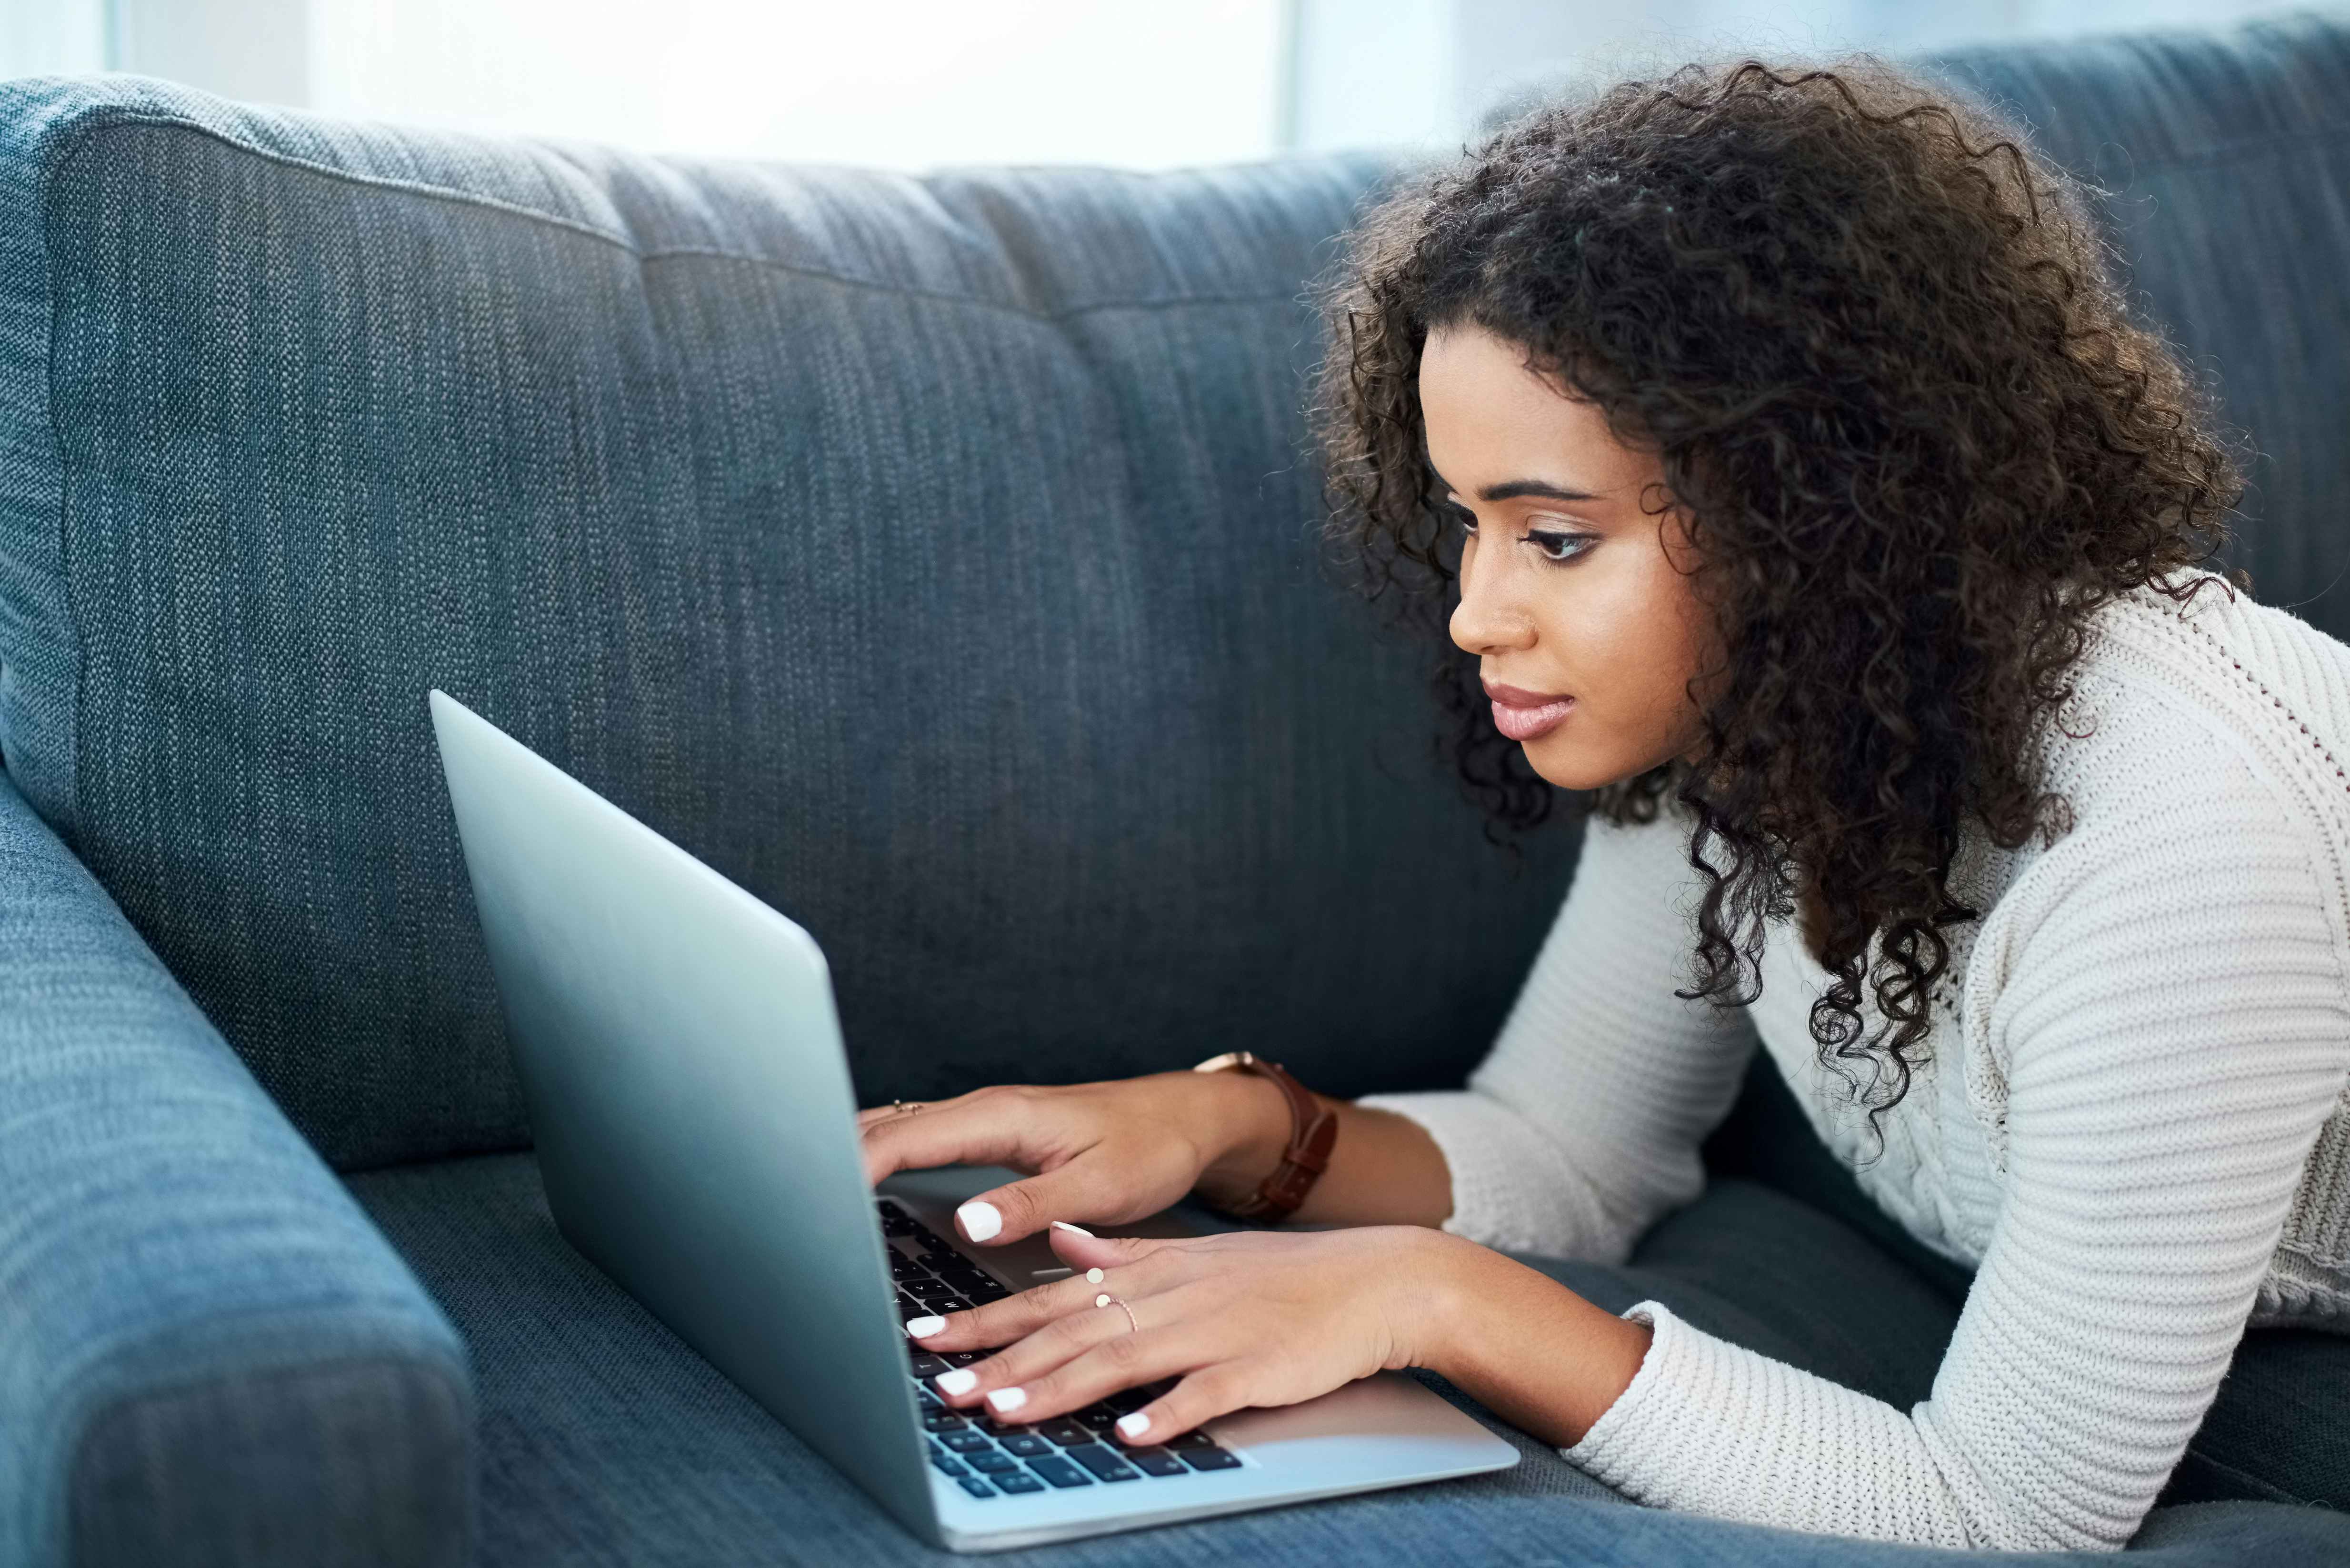 Young woman at her laptop typing while laying on the couch